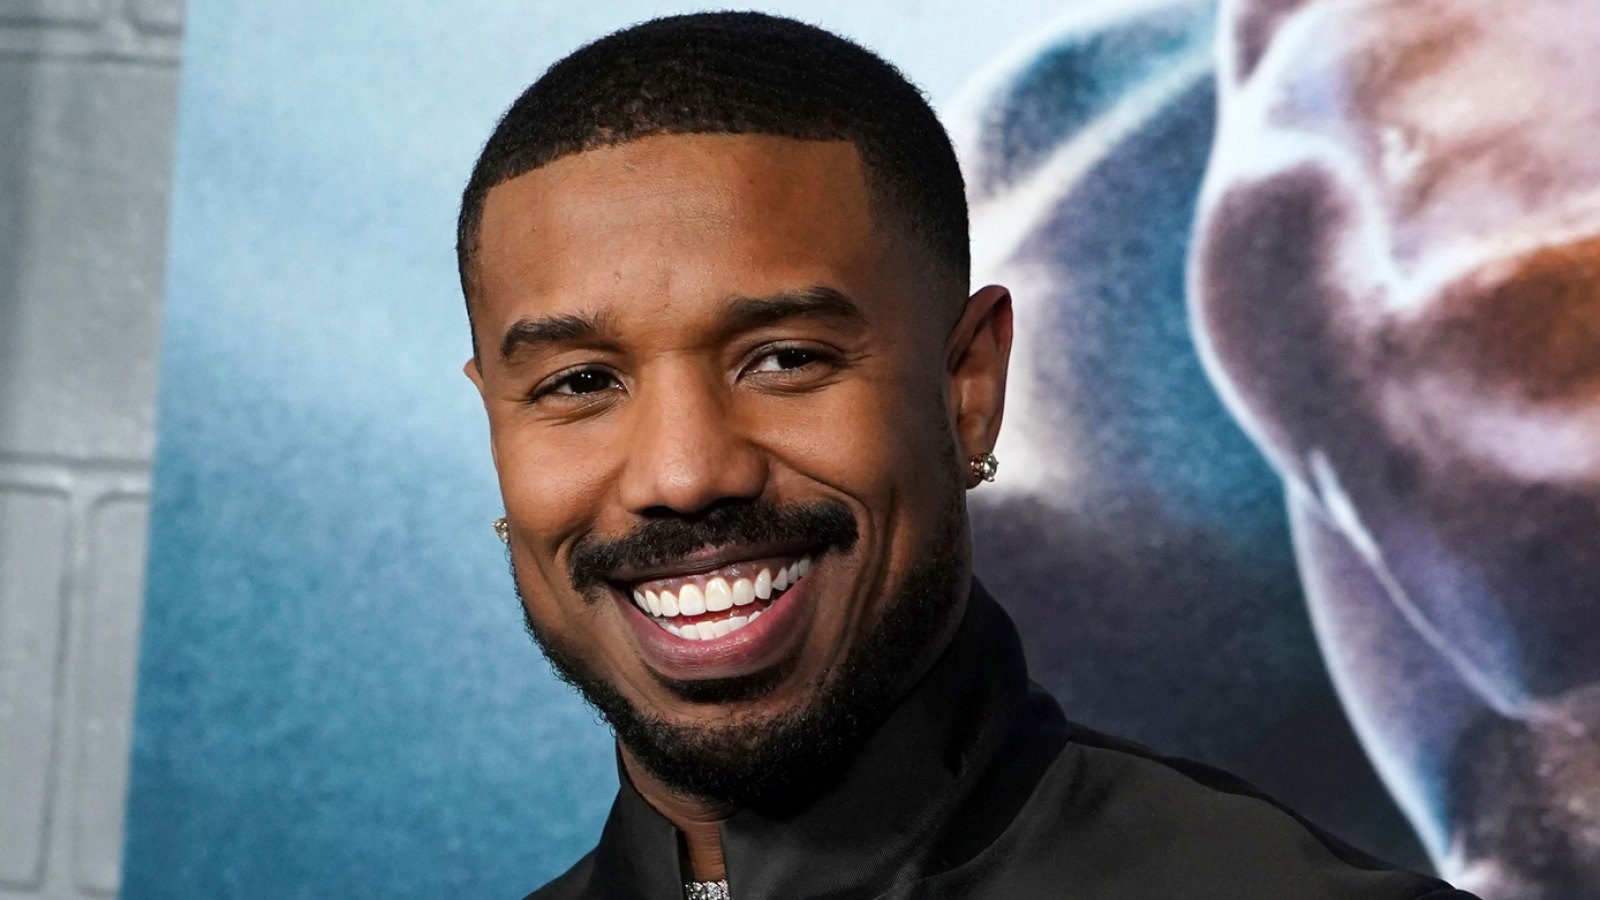 Michael B. Jordan Apologized to His Mom for Steamy Calvin Klein Ad